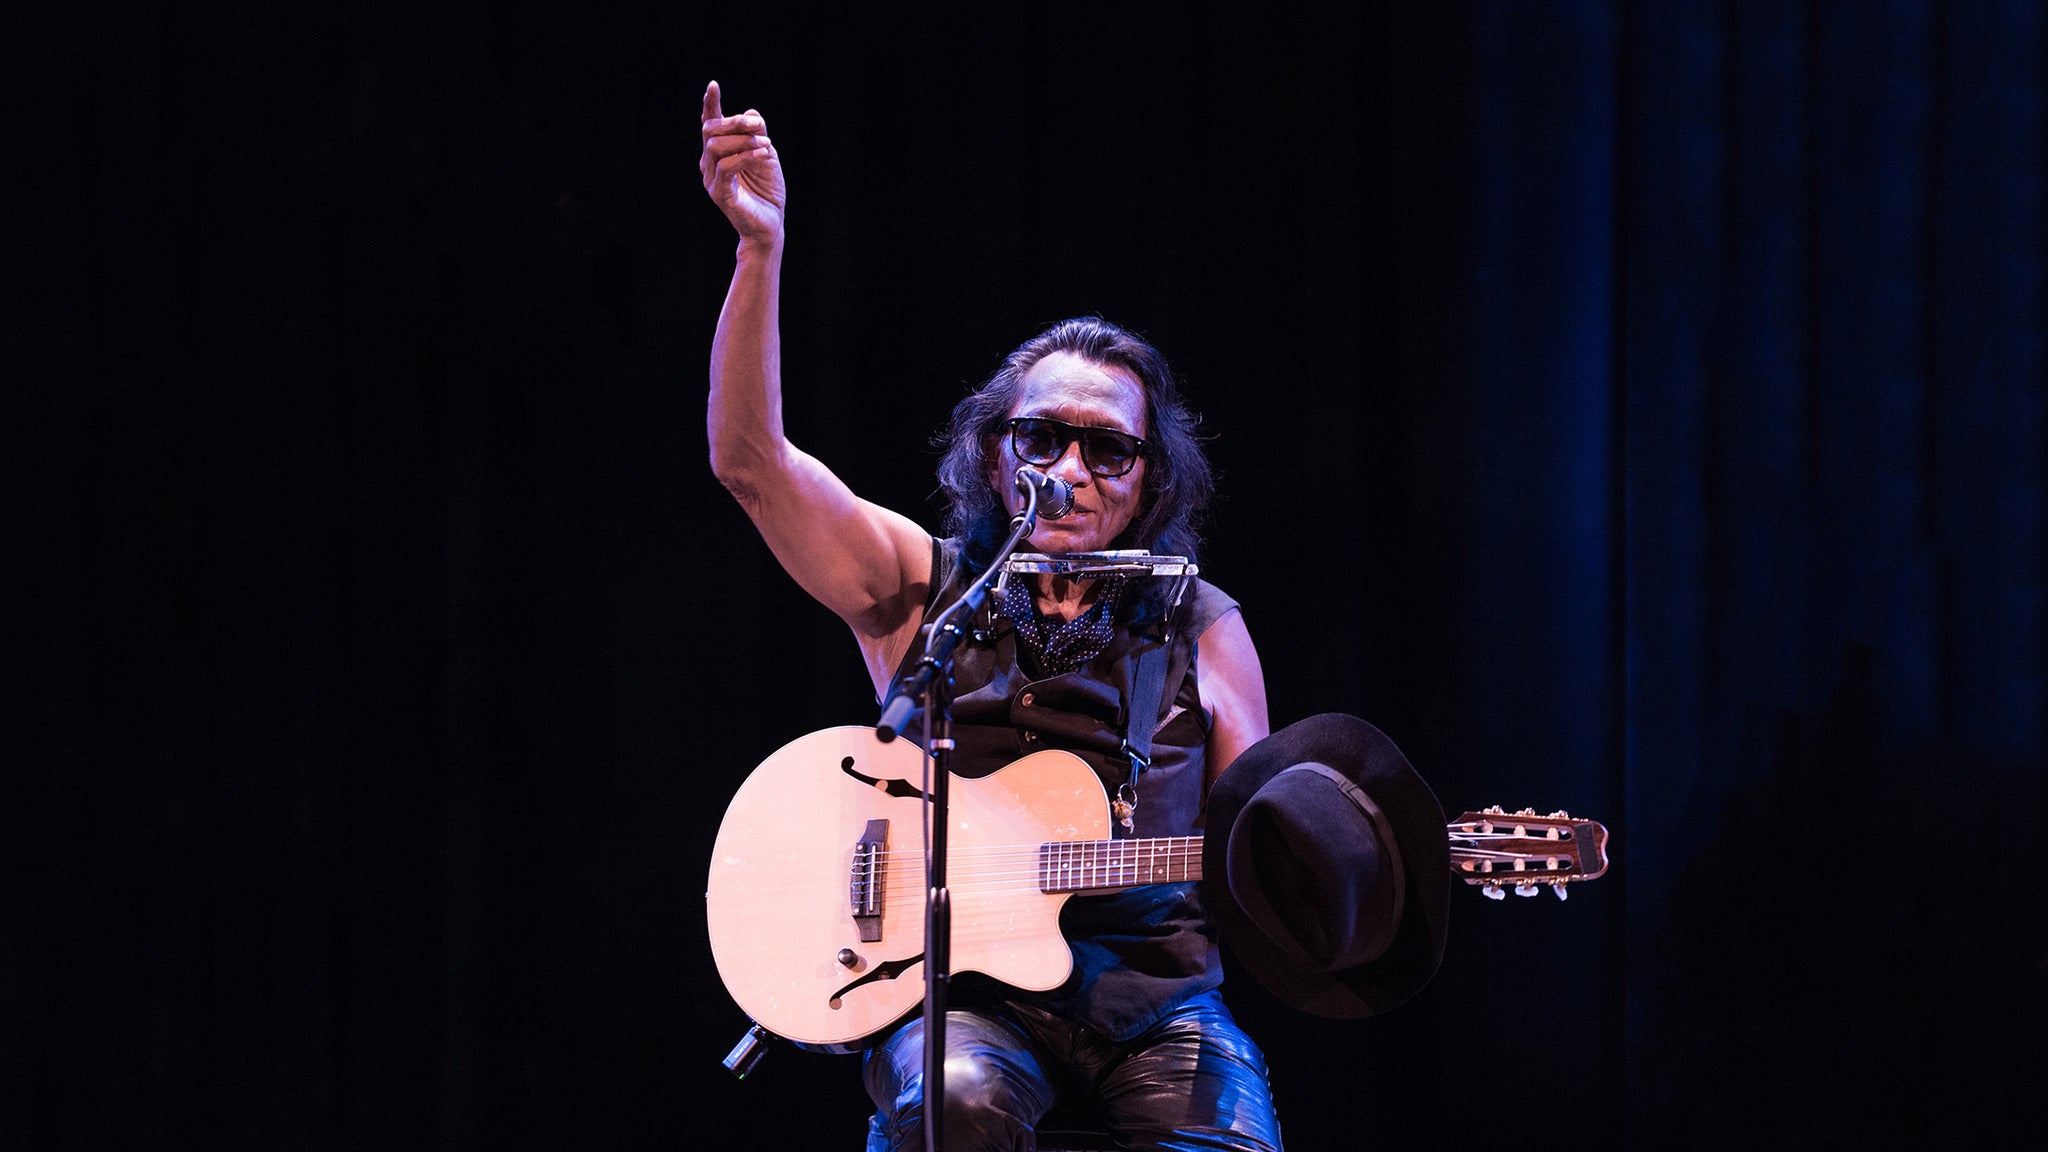 Rodriguez in Akron promo photo for Exclusive presale offer code